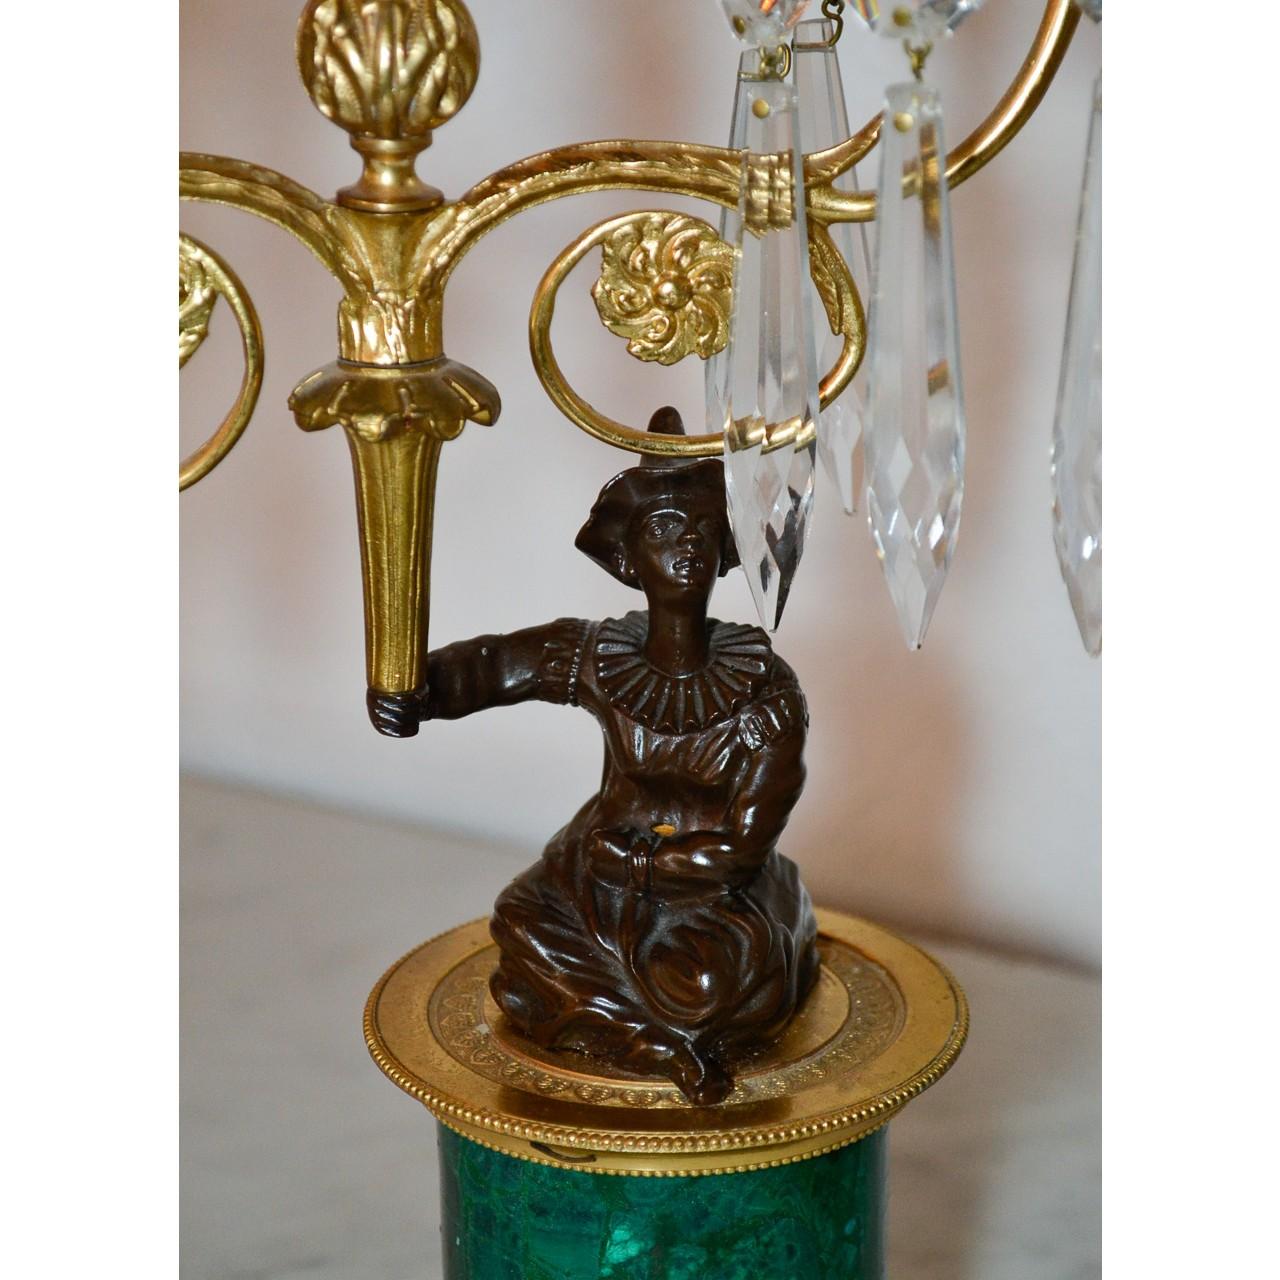 Gorgeous pair of figural bronze and natural malachite candelabras with crystal drops.
Made in France, circa 1880.
Napoleon III era.